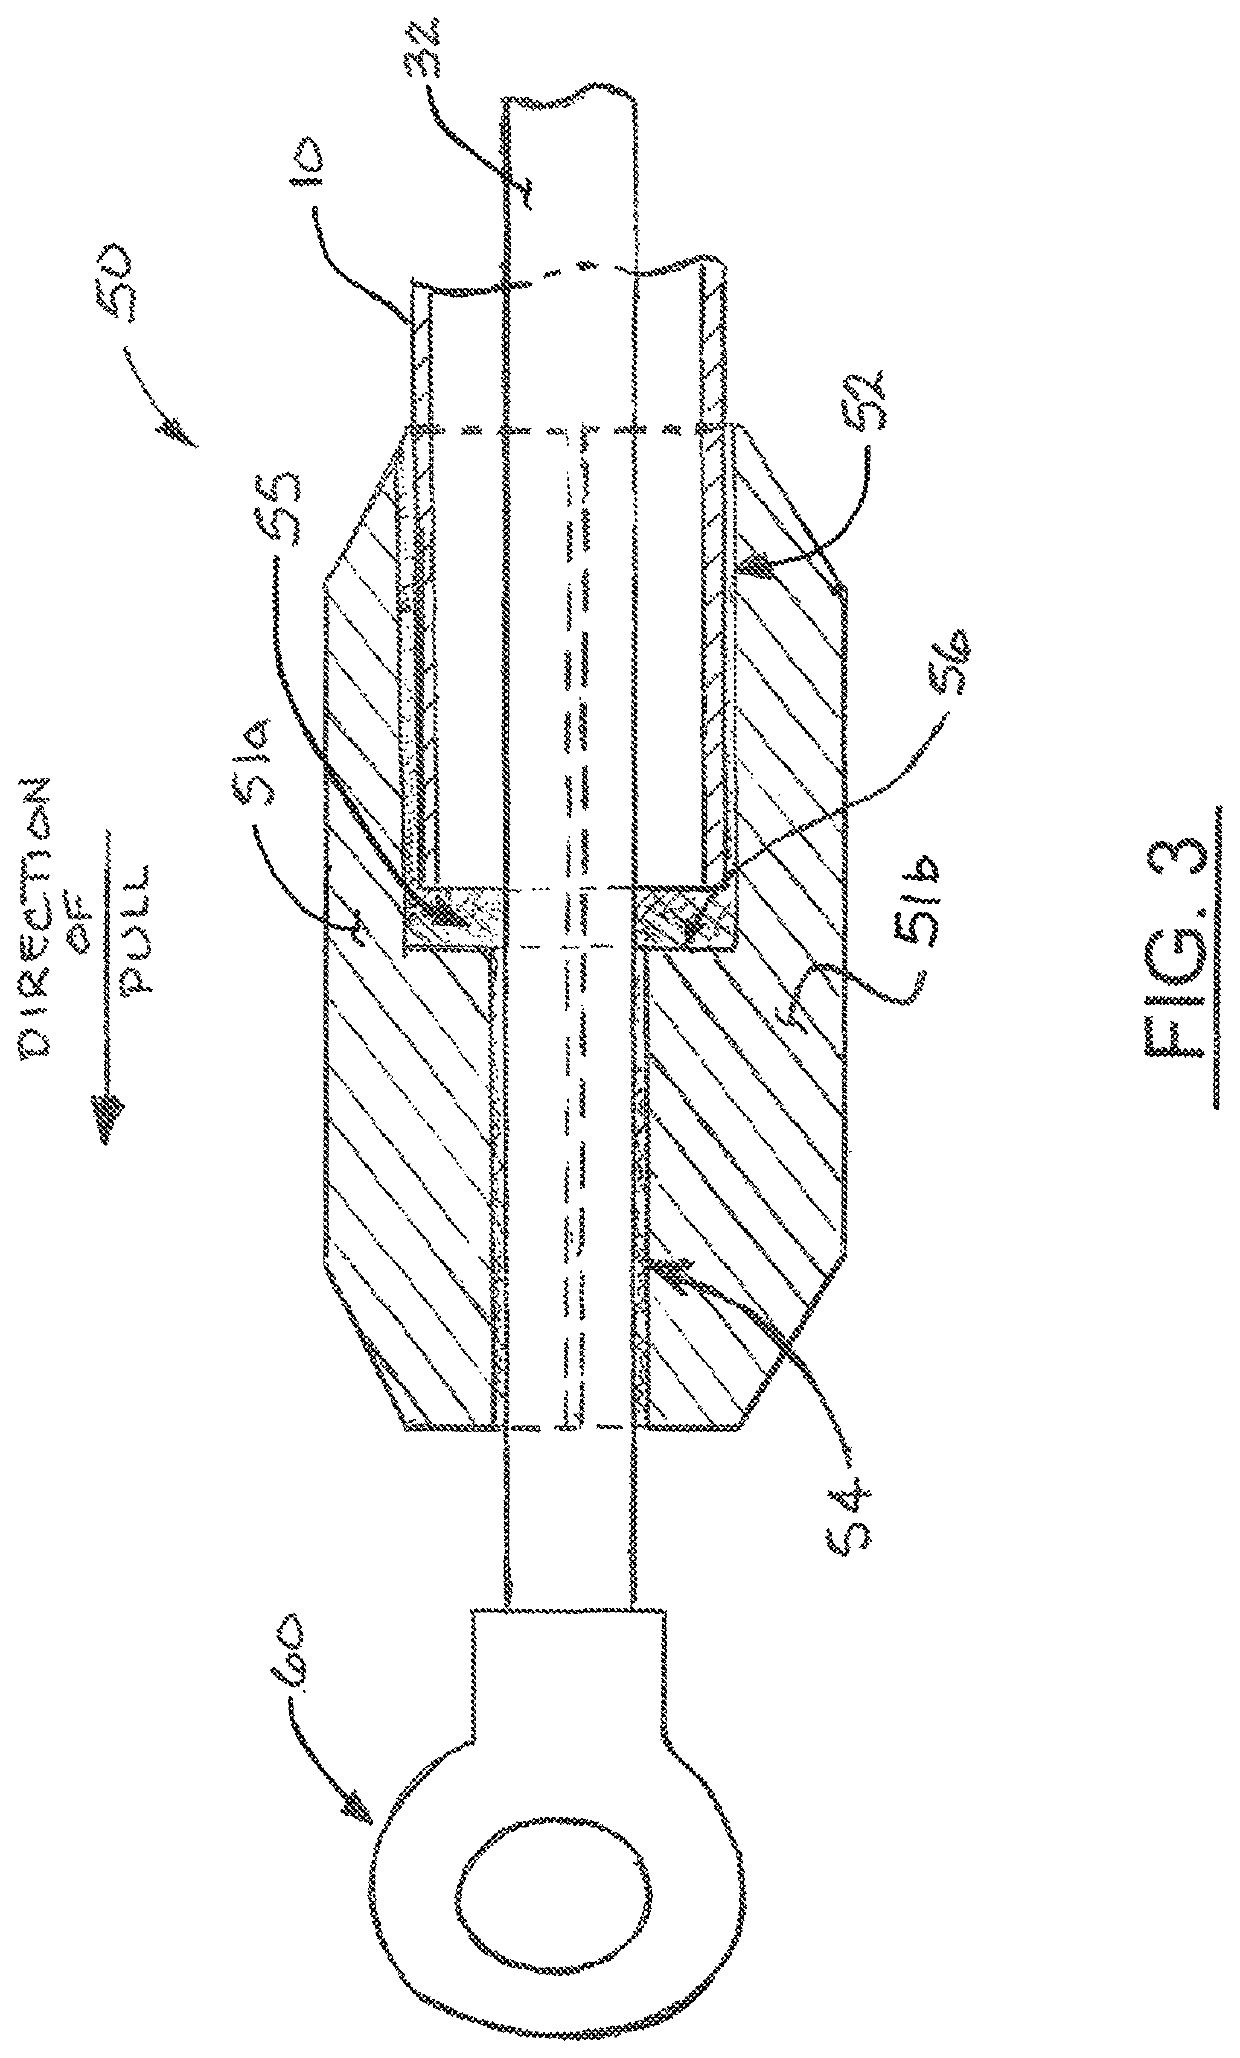 Lead service water pipe line removal apparatus and method